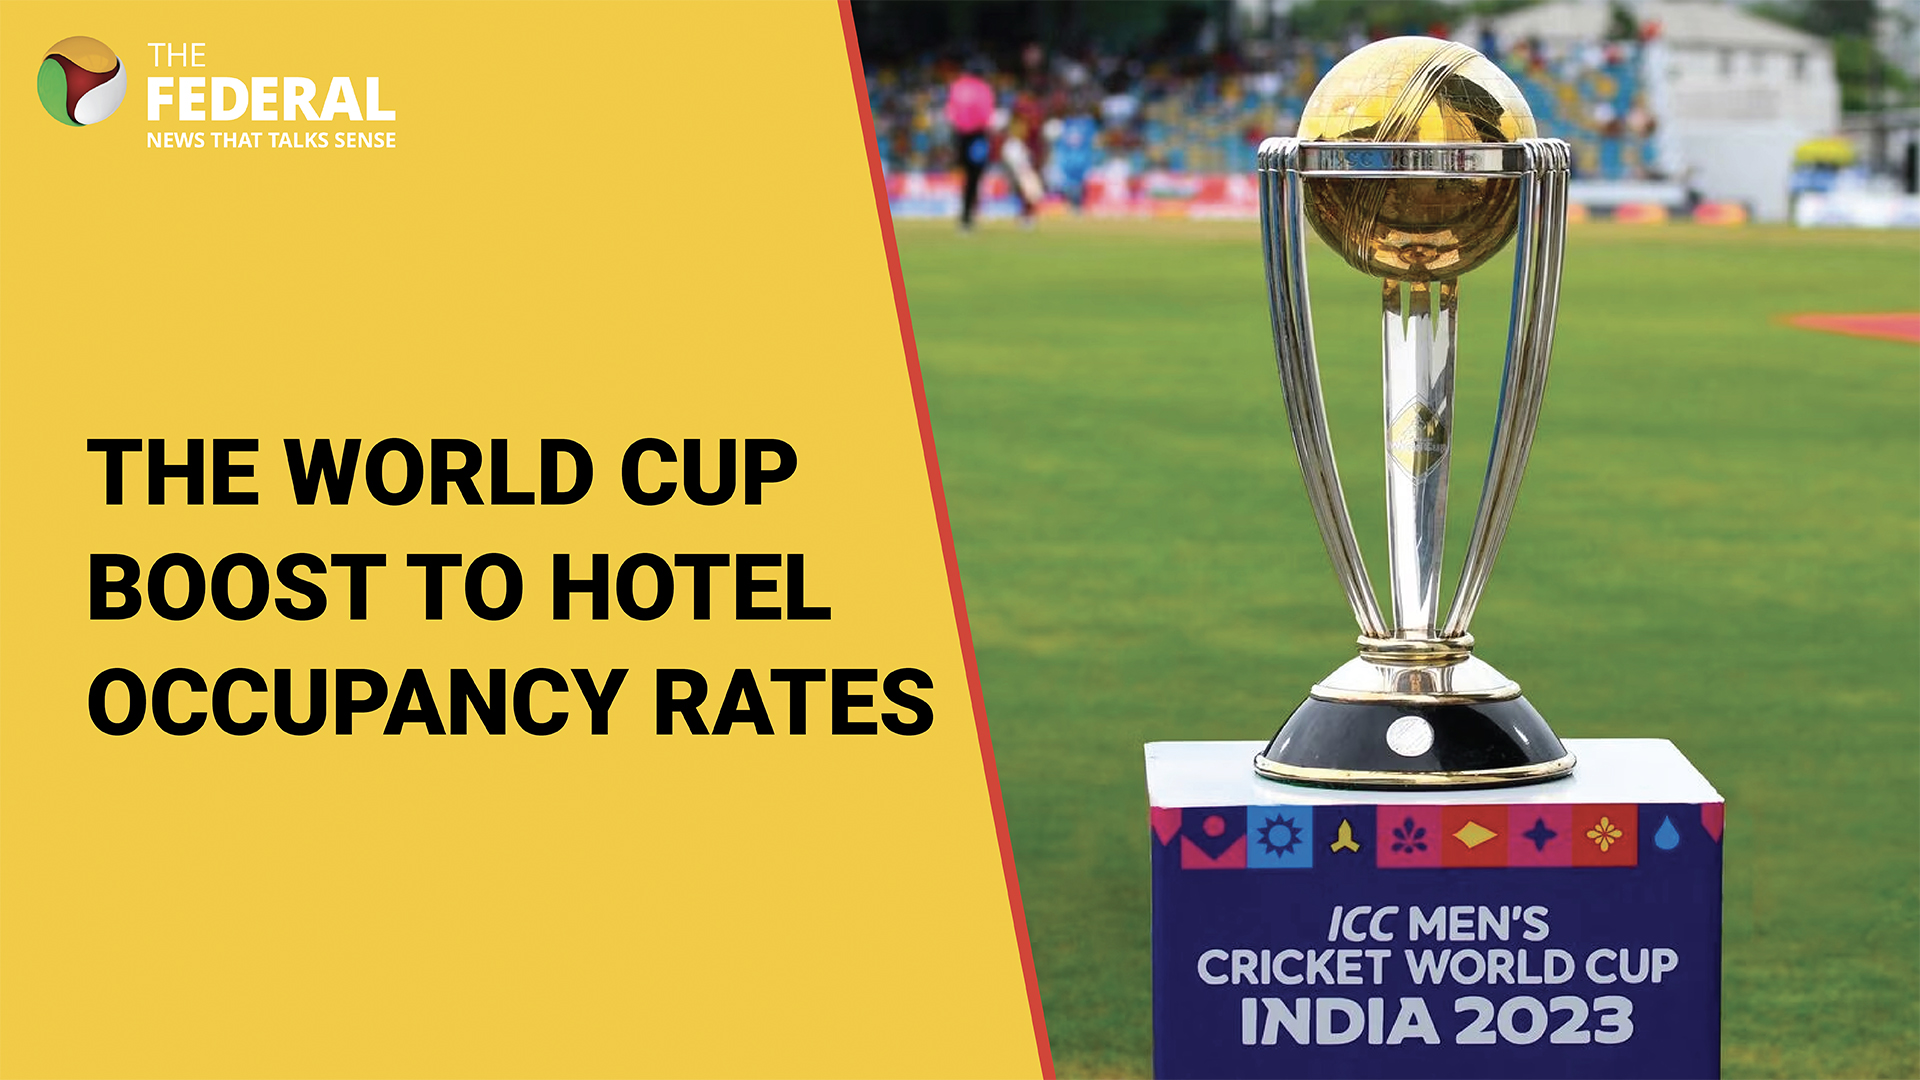 The World Cup boost to hotel occupancy rates